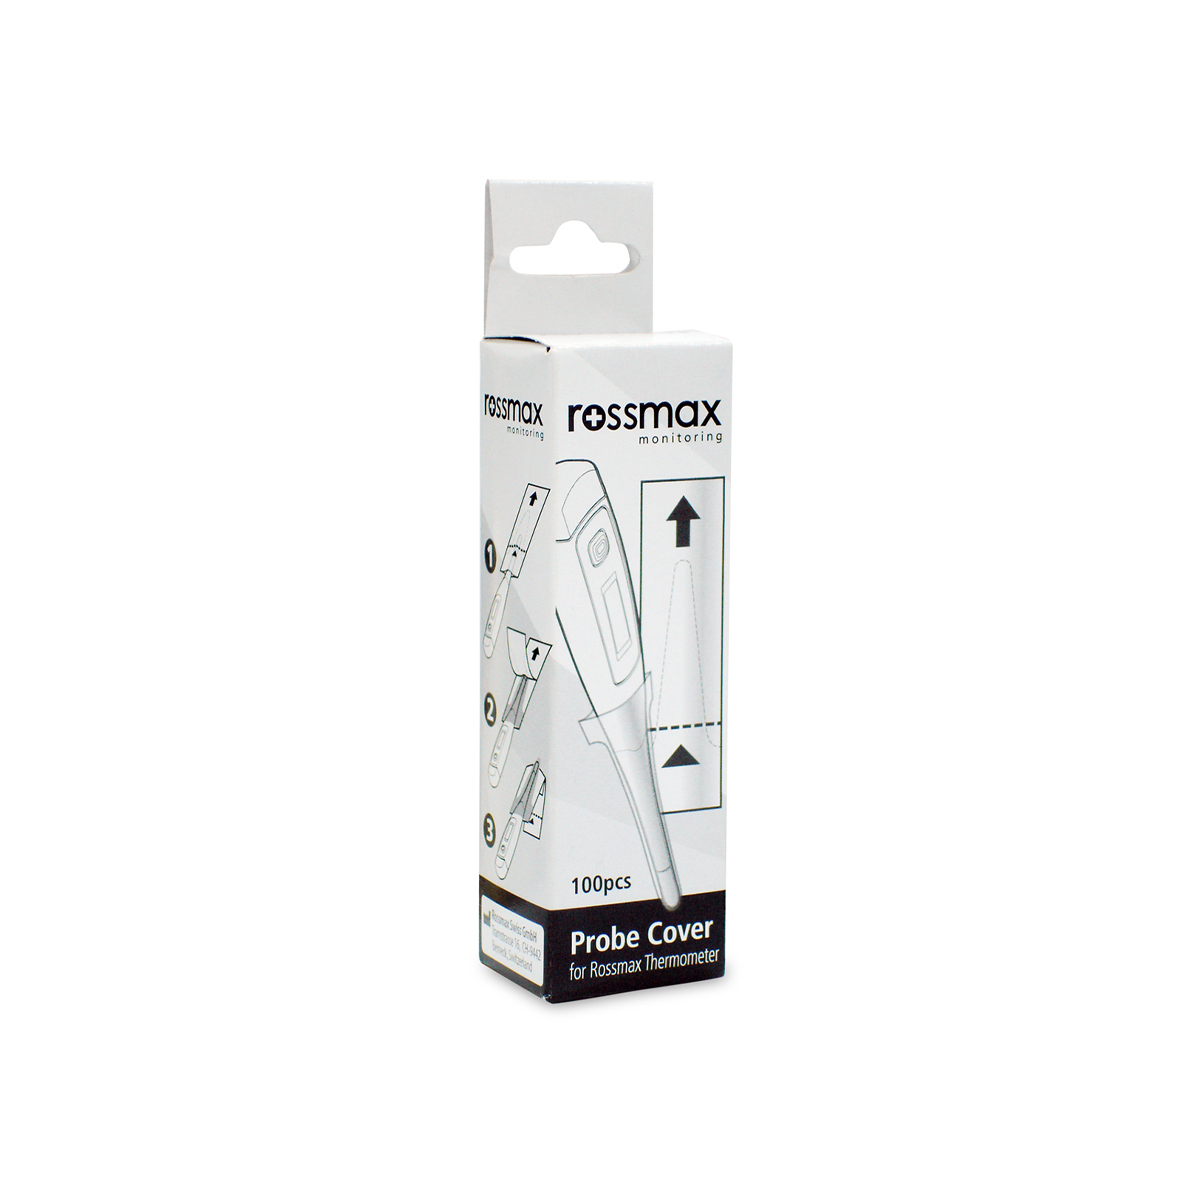 Rossmax Probe Covers for TG380 Digital Flexi-Tip Thermometer